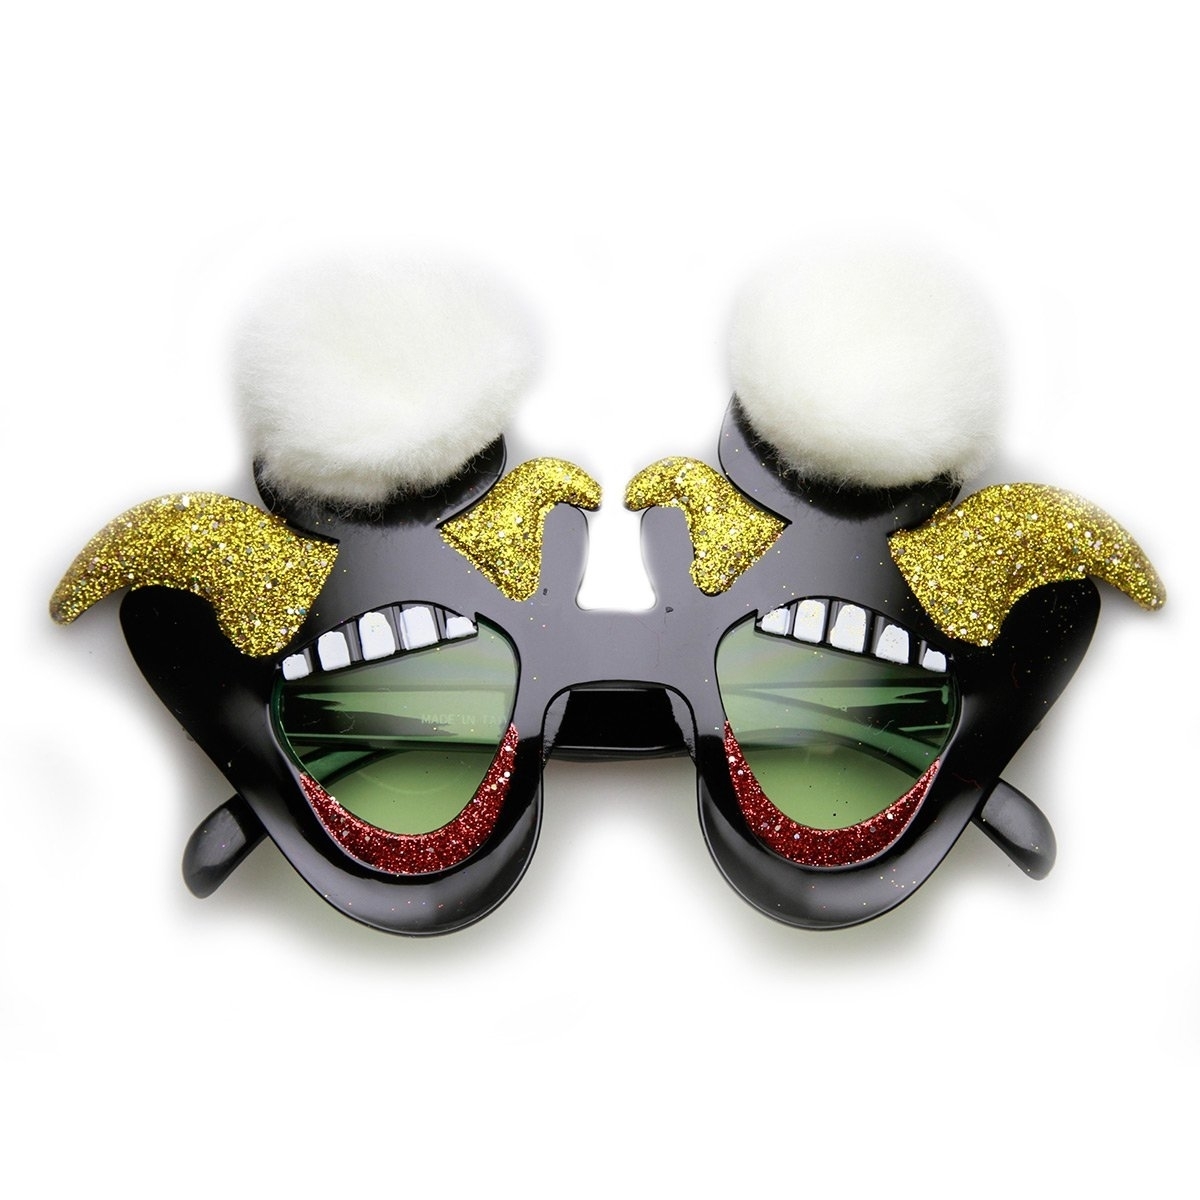 Laughing Jester Circus Clown Smile Furry Novelty Party Glasses - Black-White-Gold Green